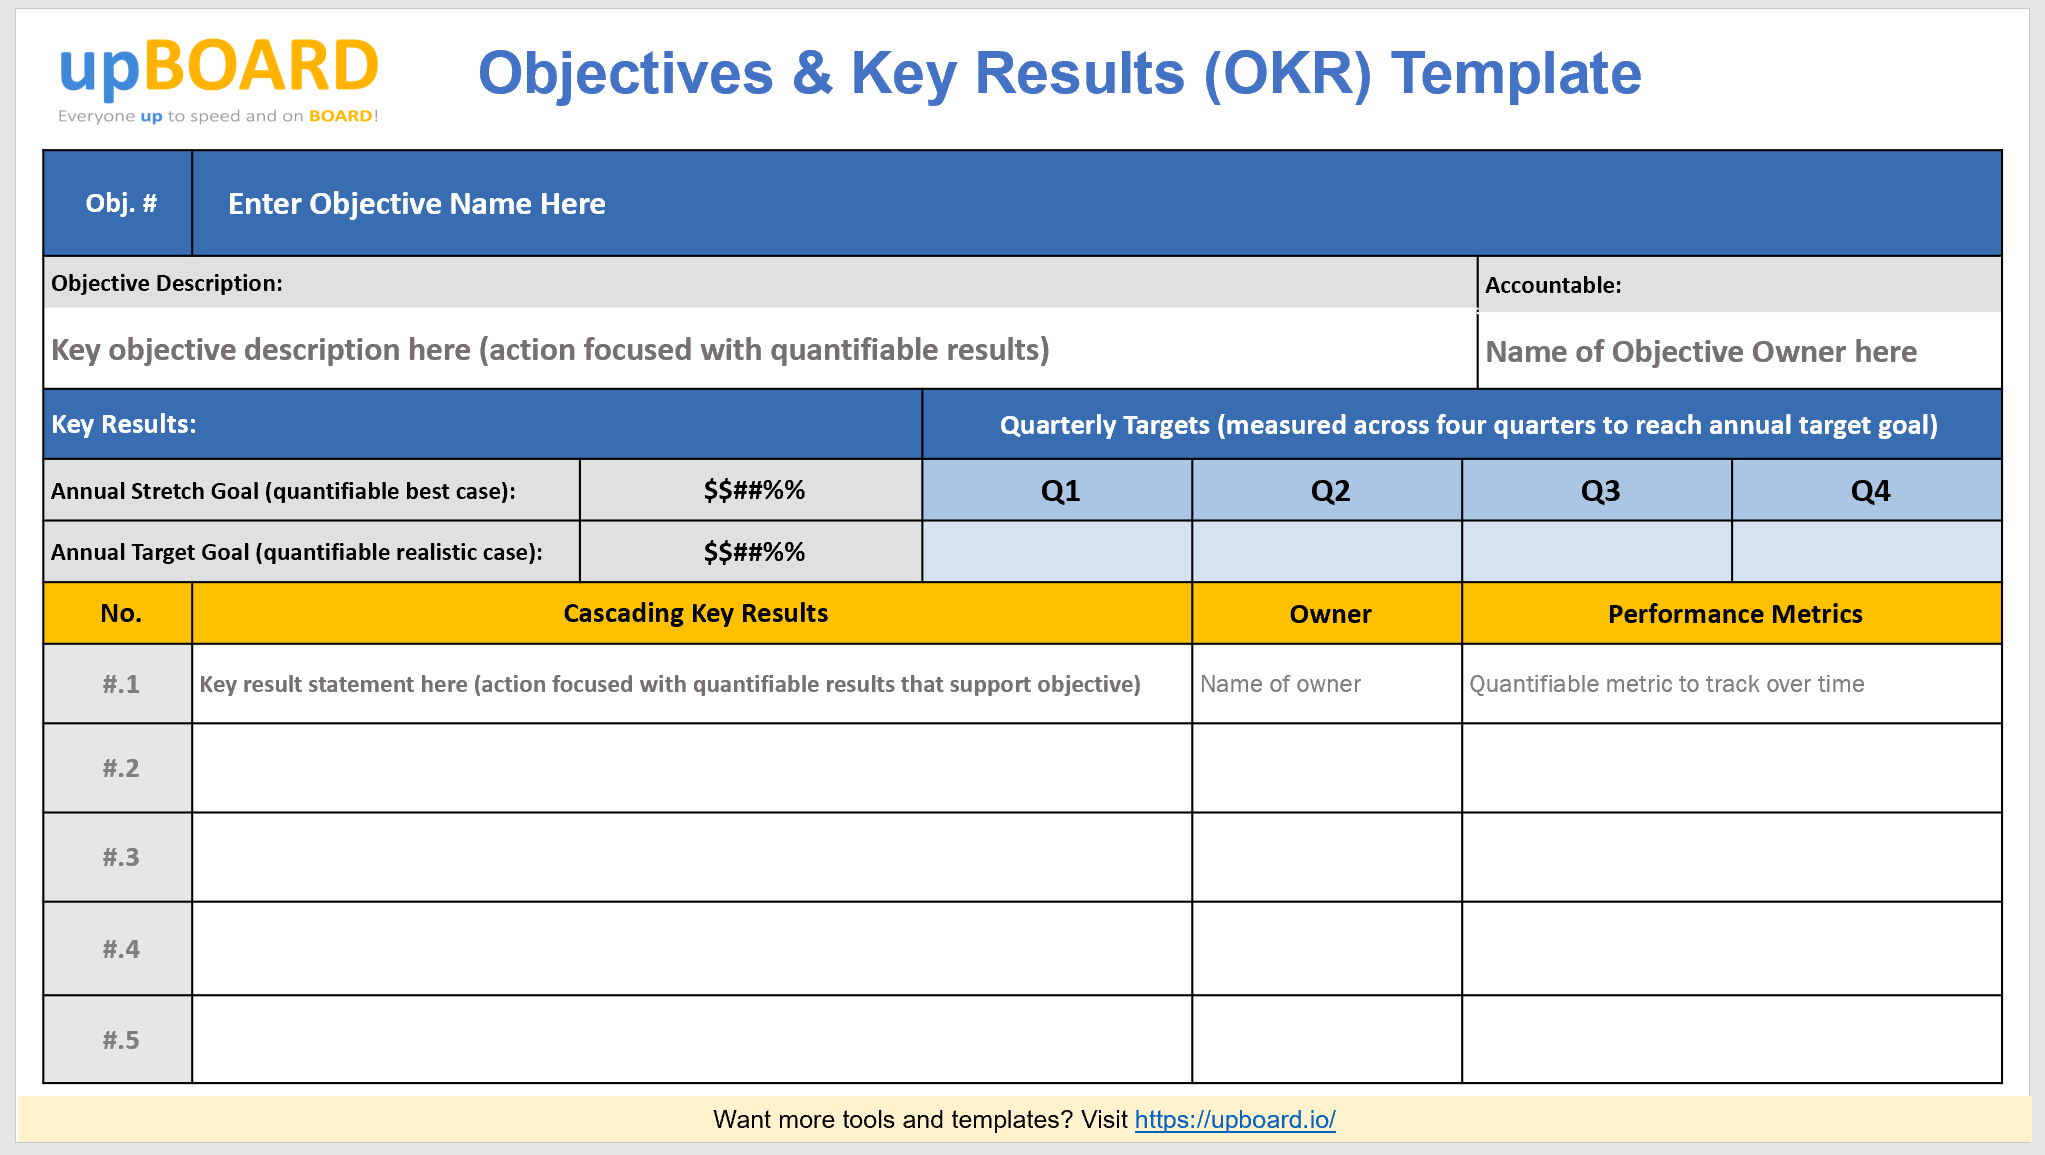 Okr Objectives Key Results Online Tools & Templates Within Okr Template